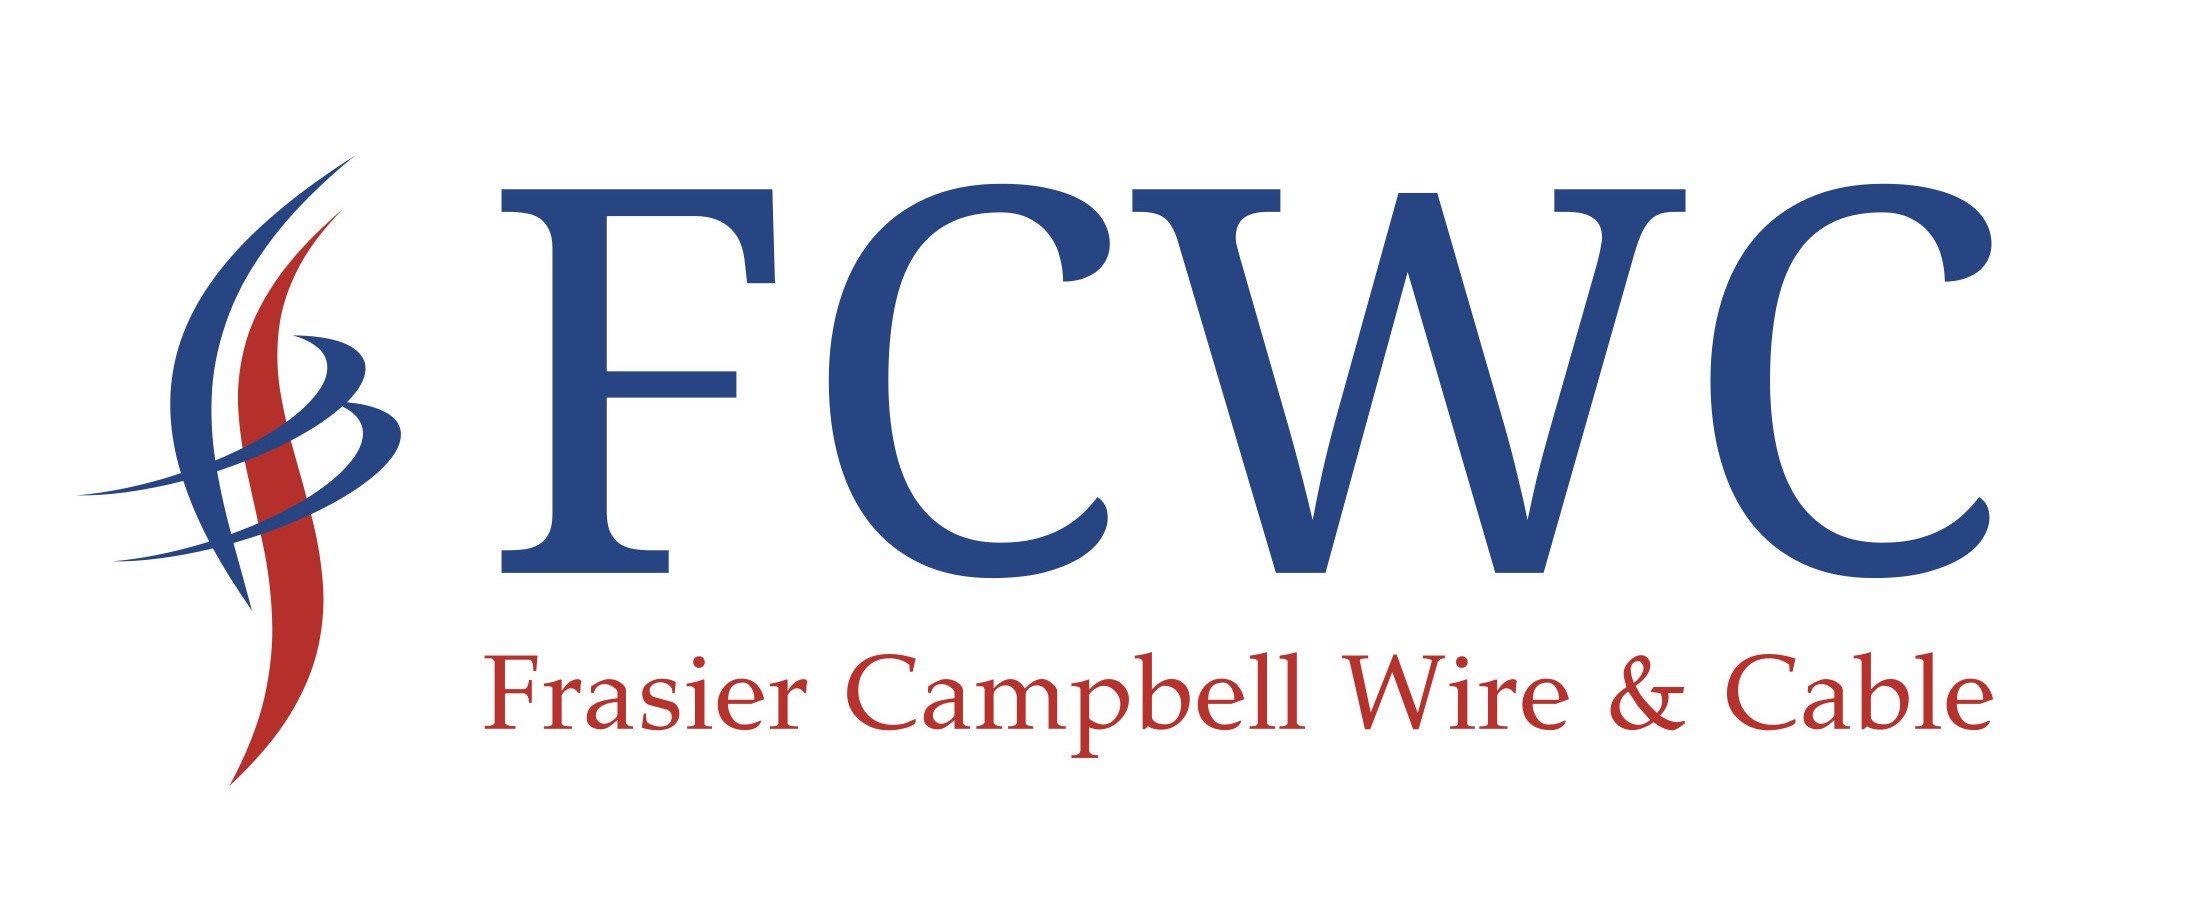 Fraiser Campbell Wire & Cable.jpg